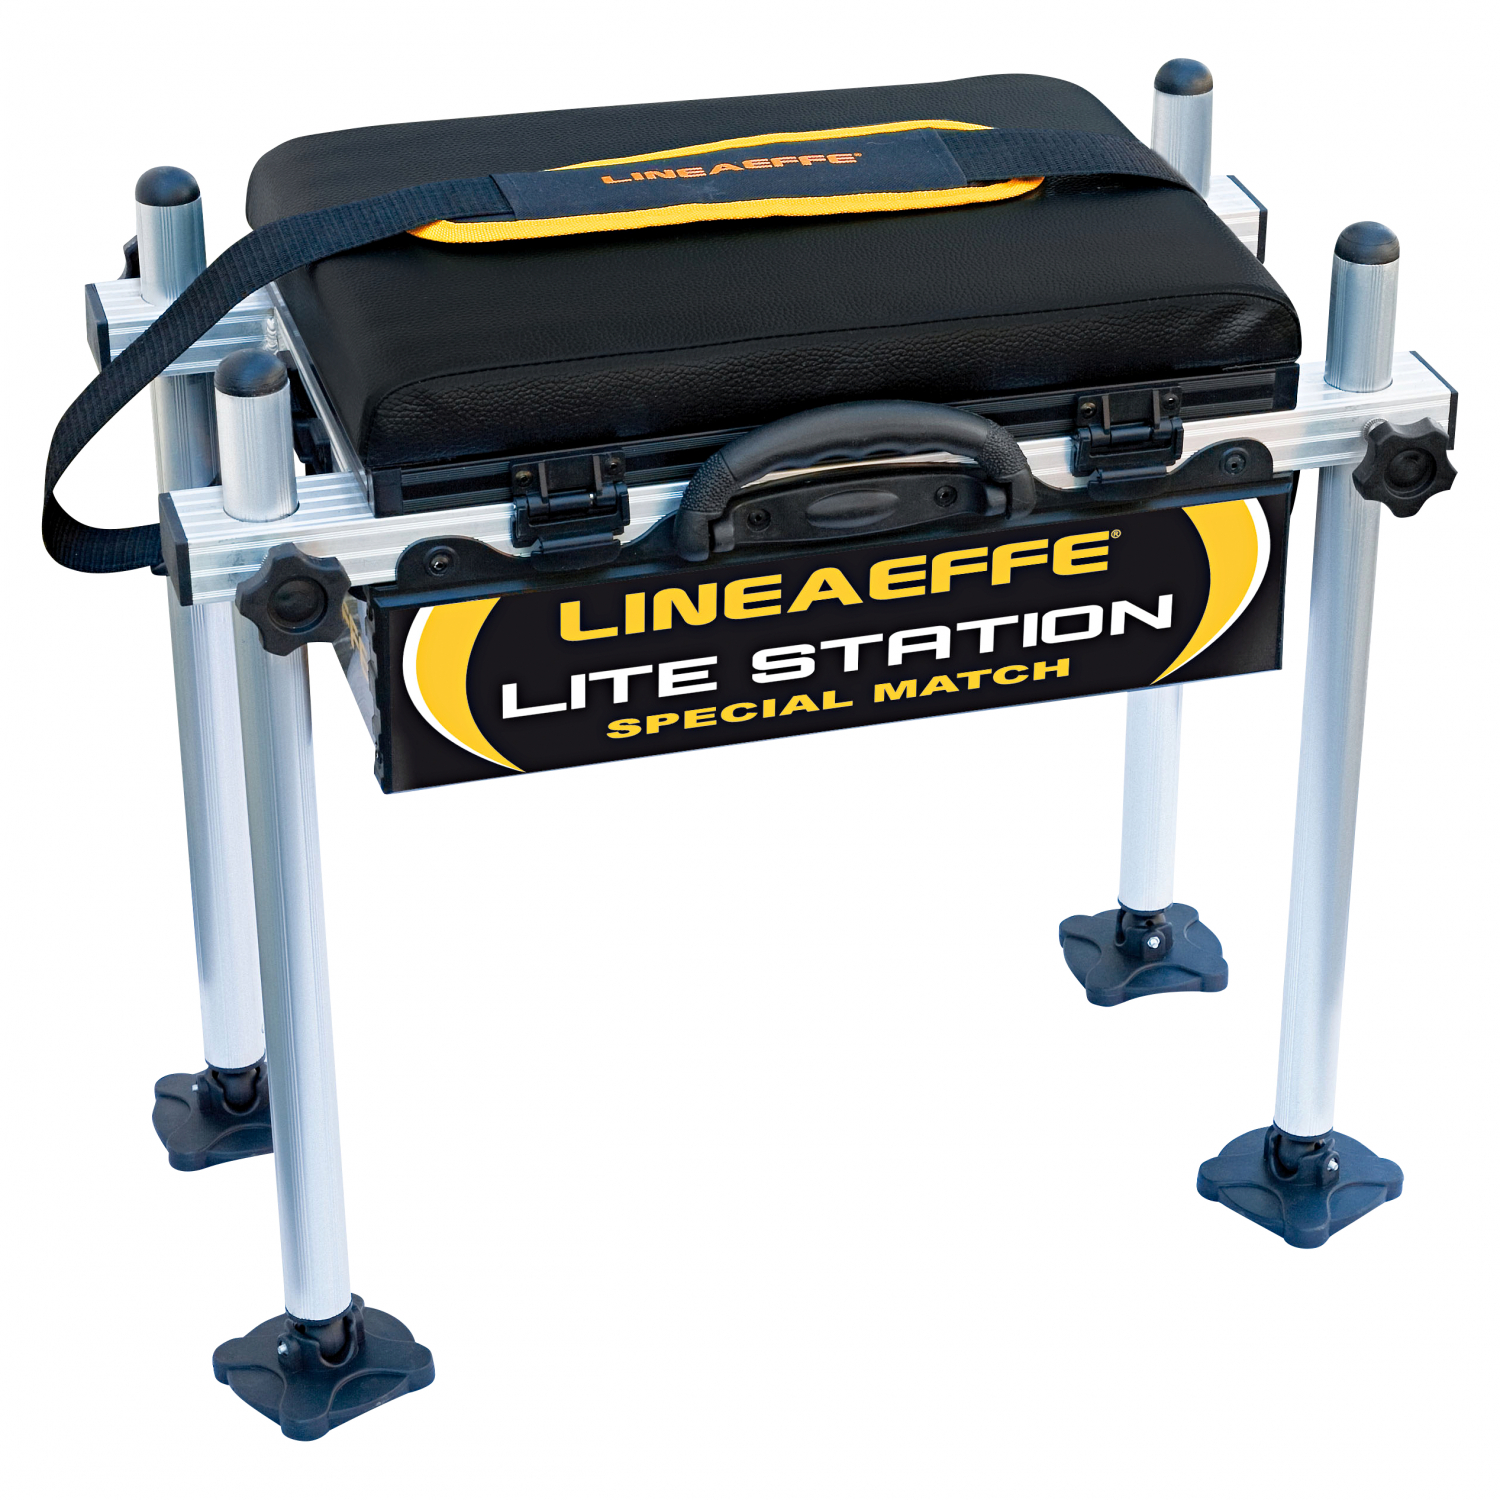 Lineaeffe Seat Gill Lite Station 